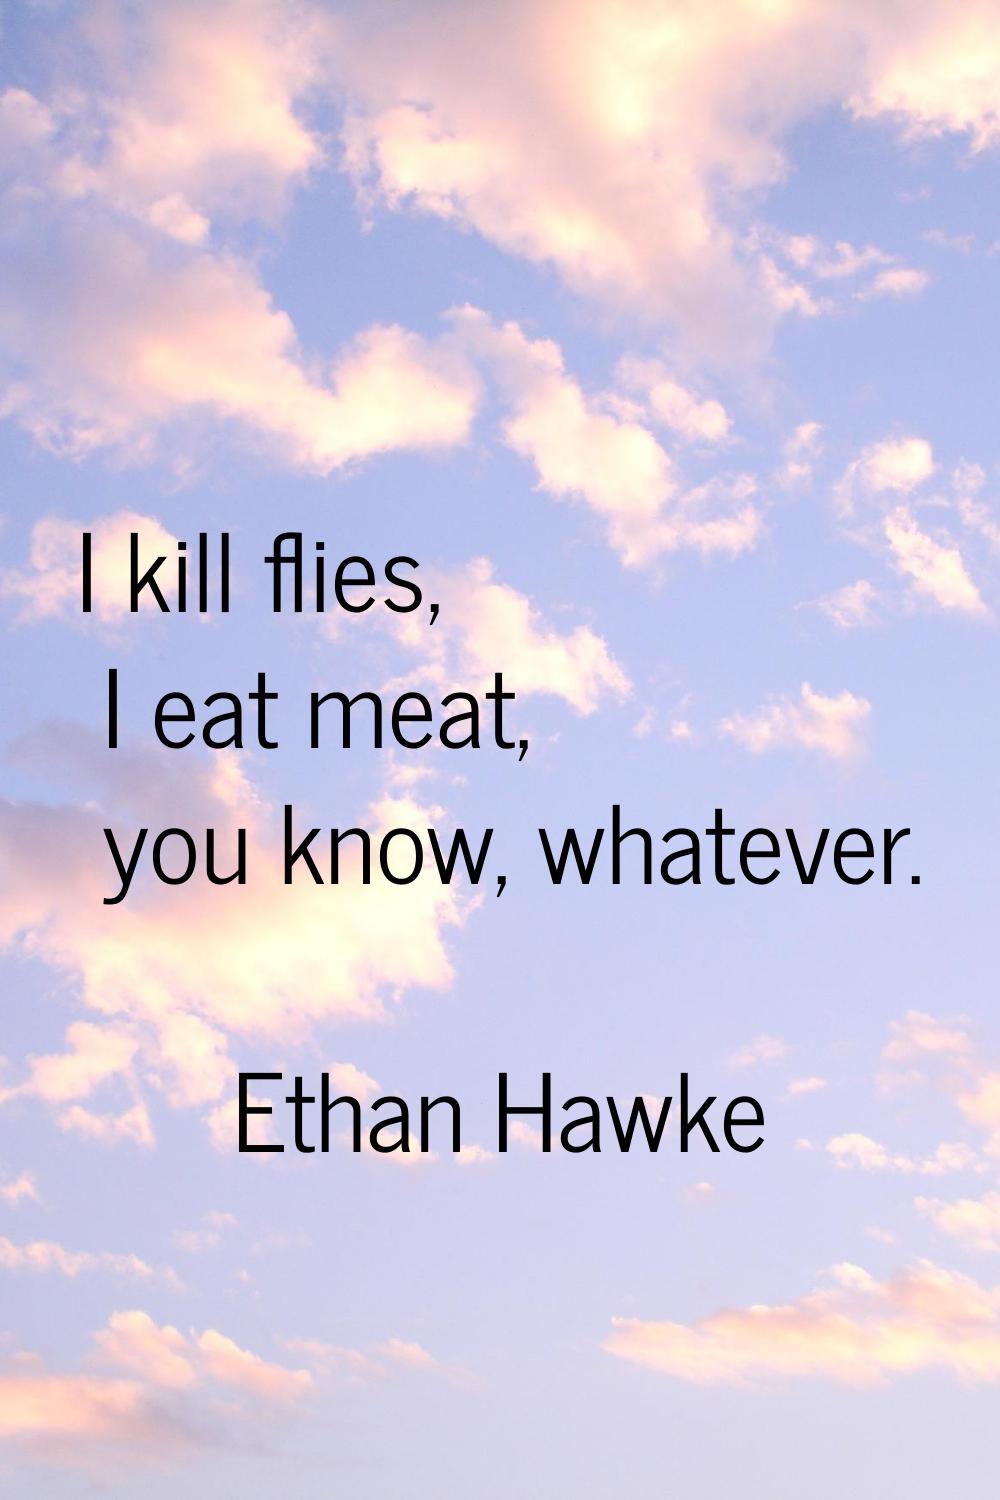 I kill flies, I eat meat, you know, whatever.